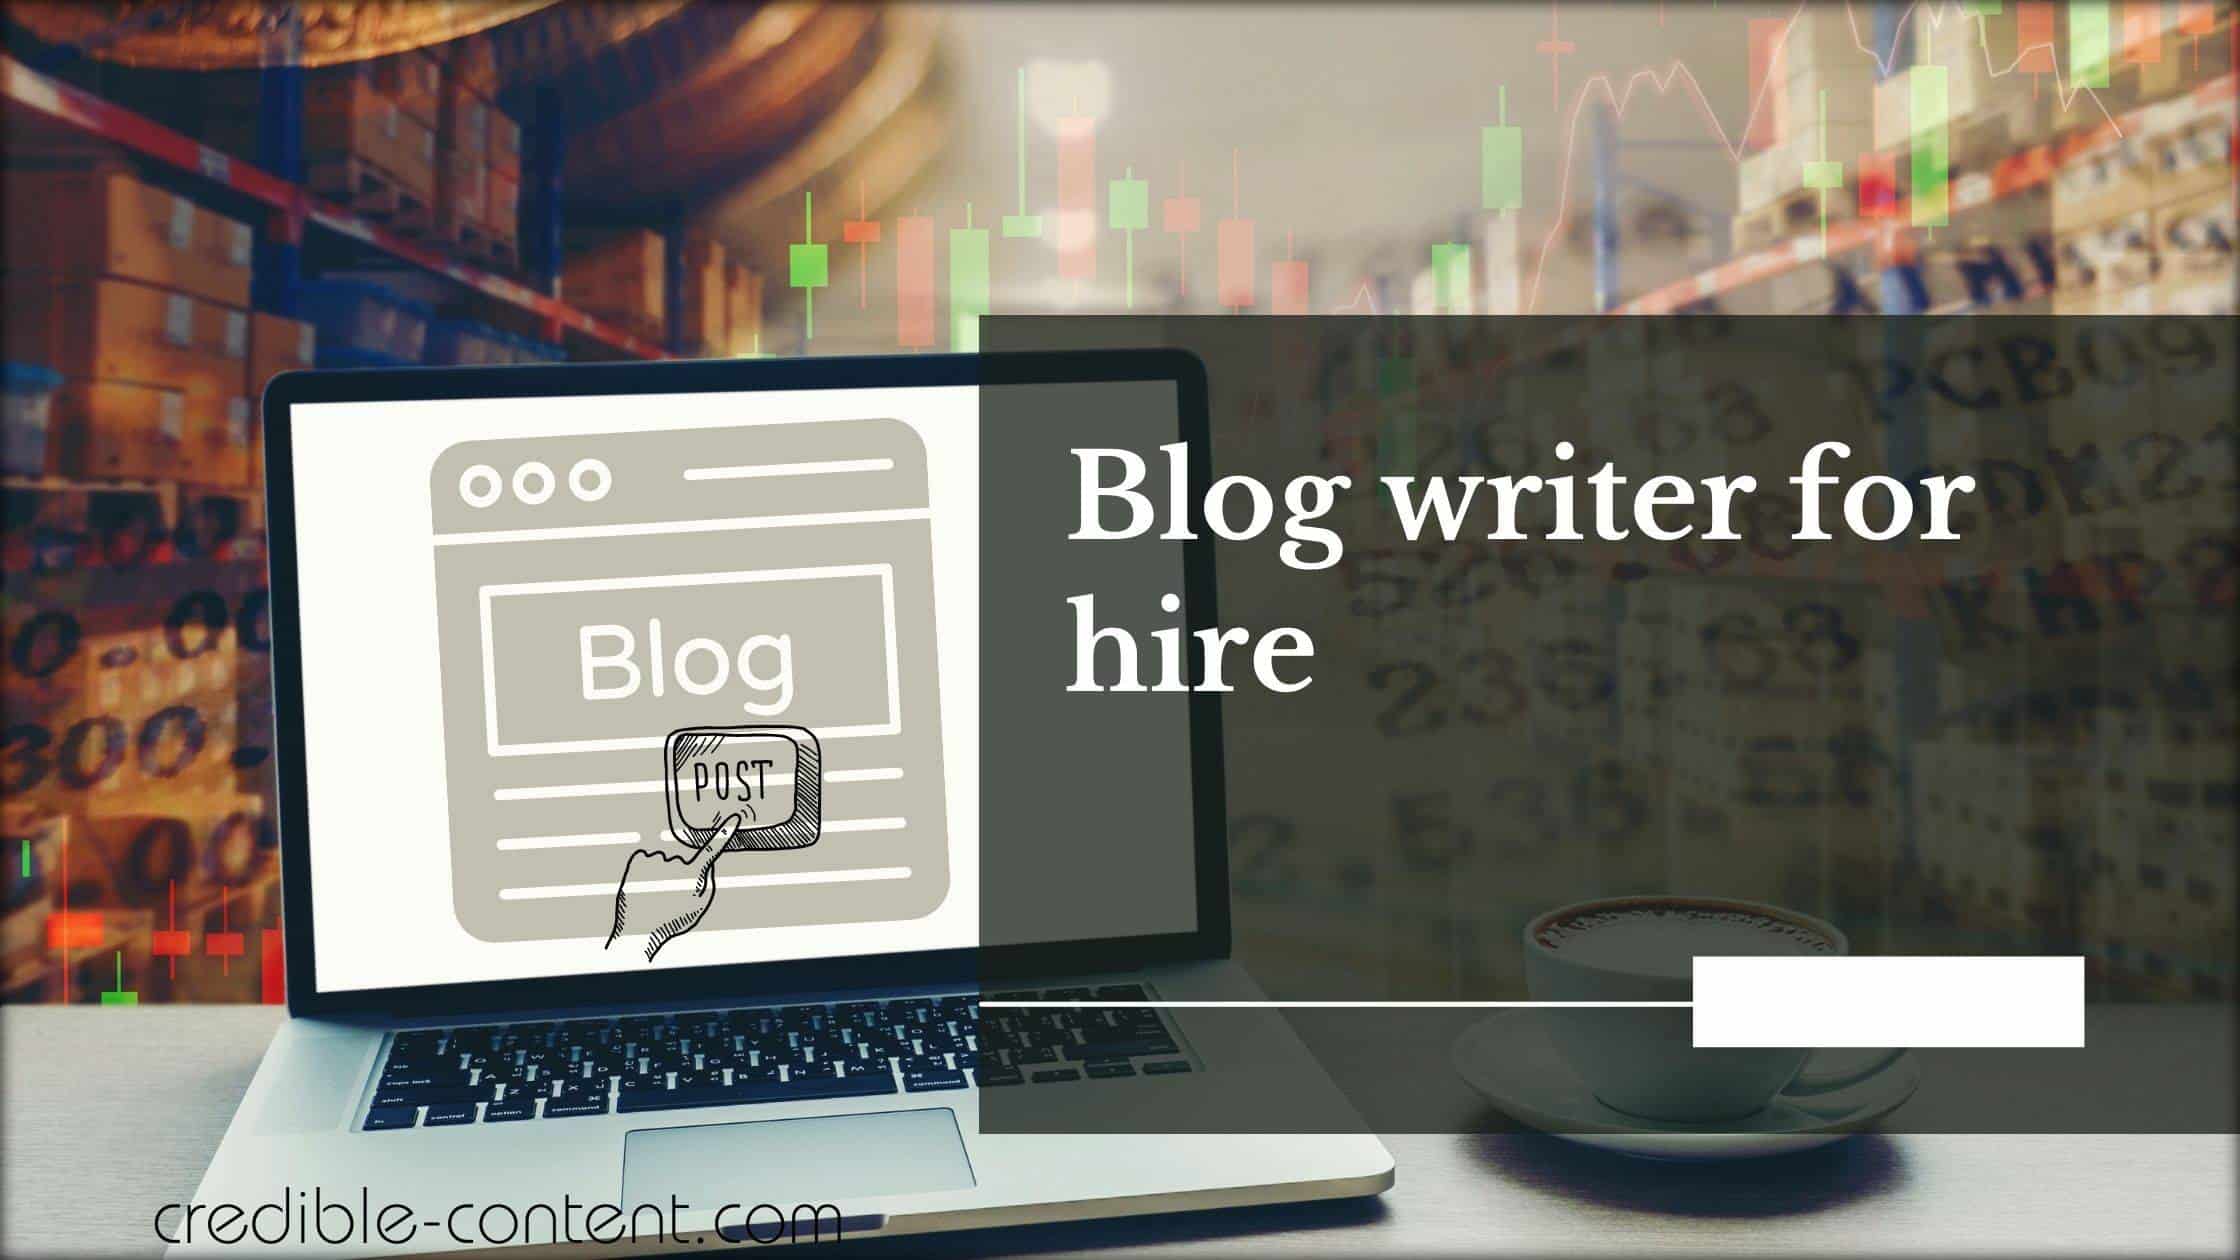 Blog writer for hire